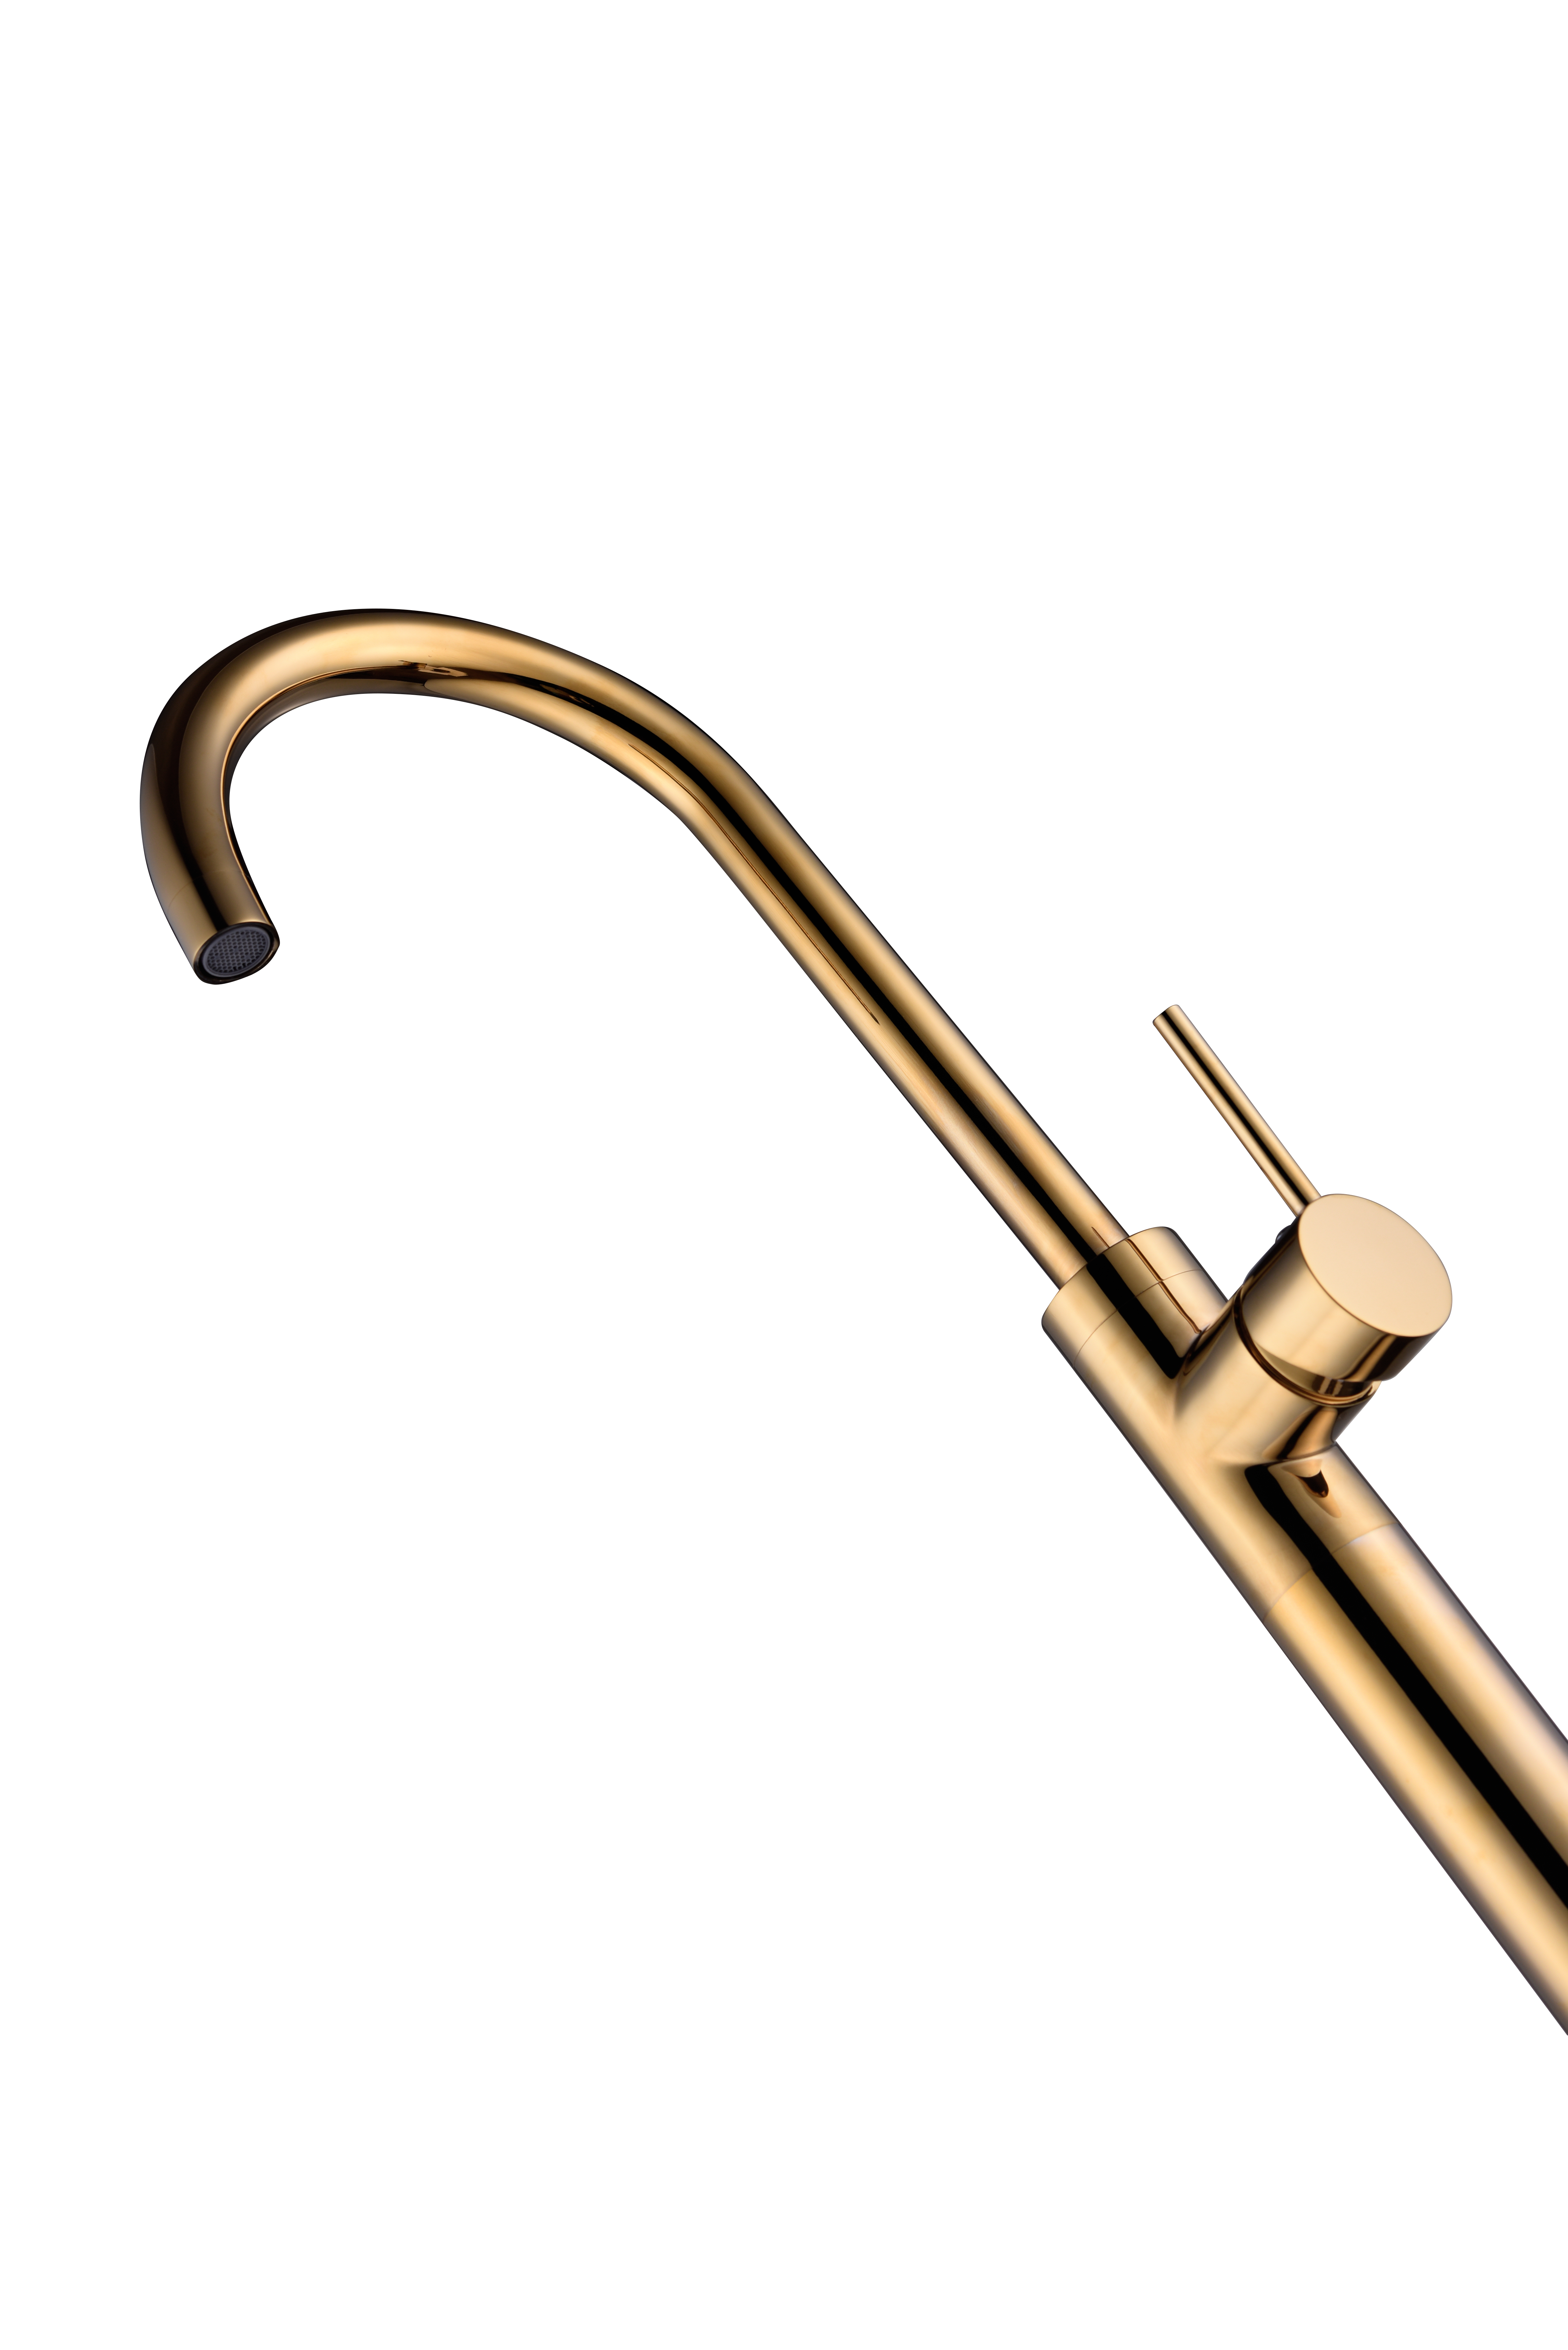 French Gold Round Sanitary Ware Faucet Tap